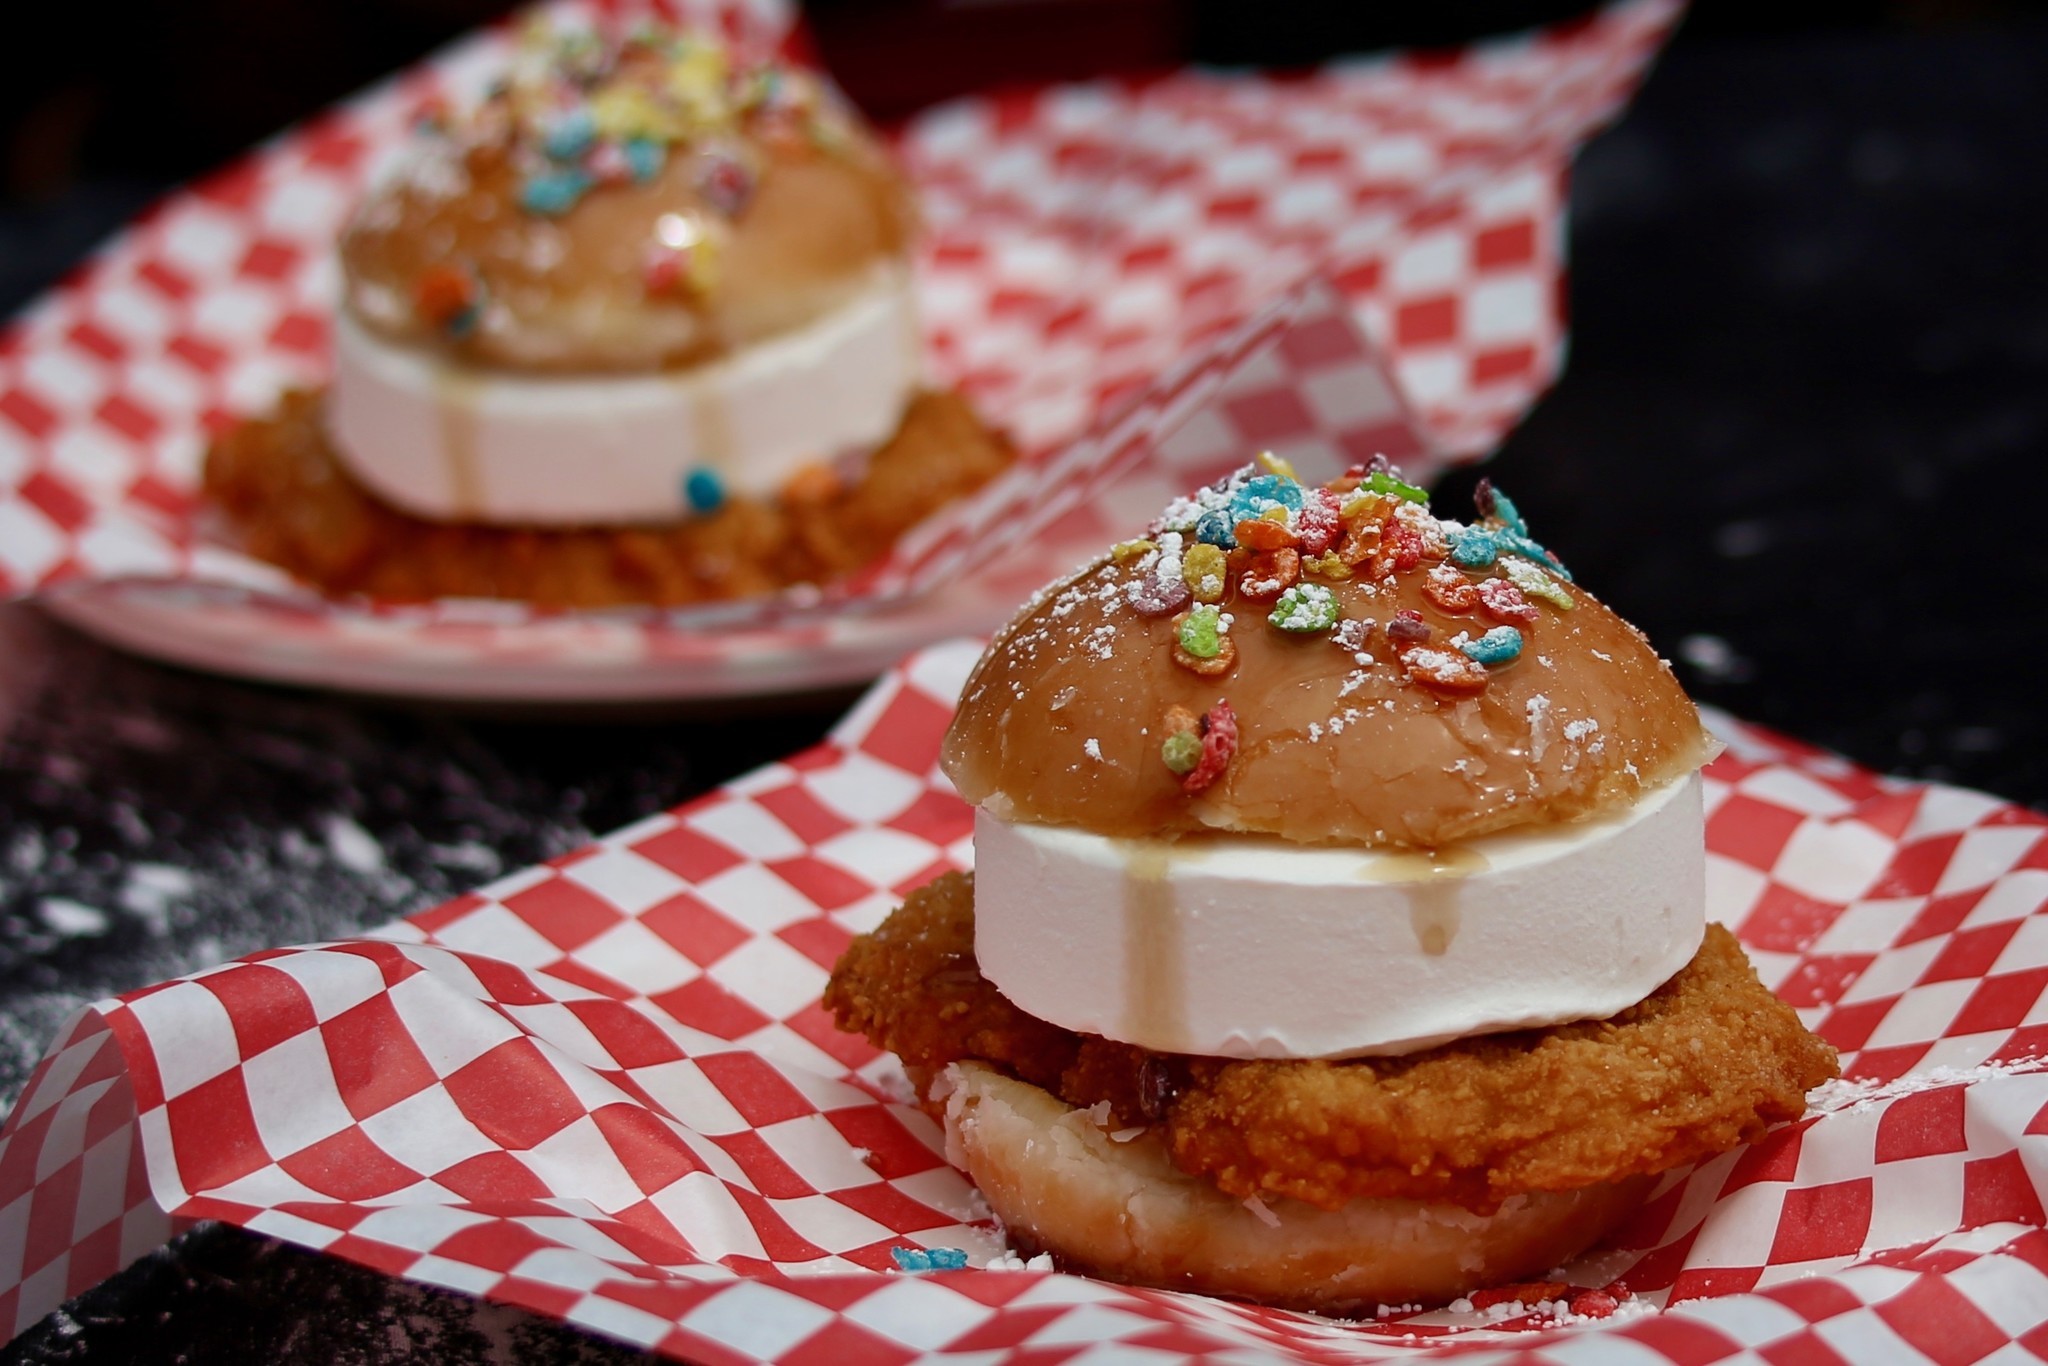 A range of culinary concoctions will be dished out at this year’s county fair, including the donut fried chicken ice cream sandwich by Chicken Charlie’s.